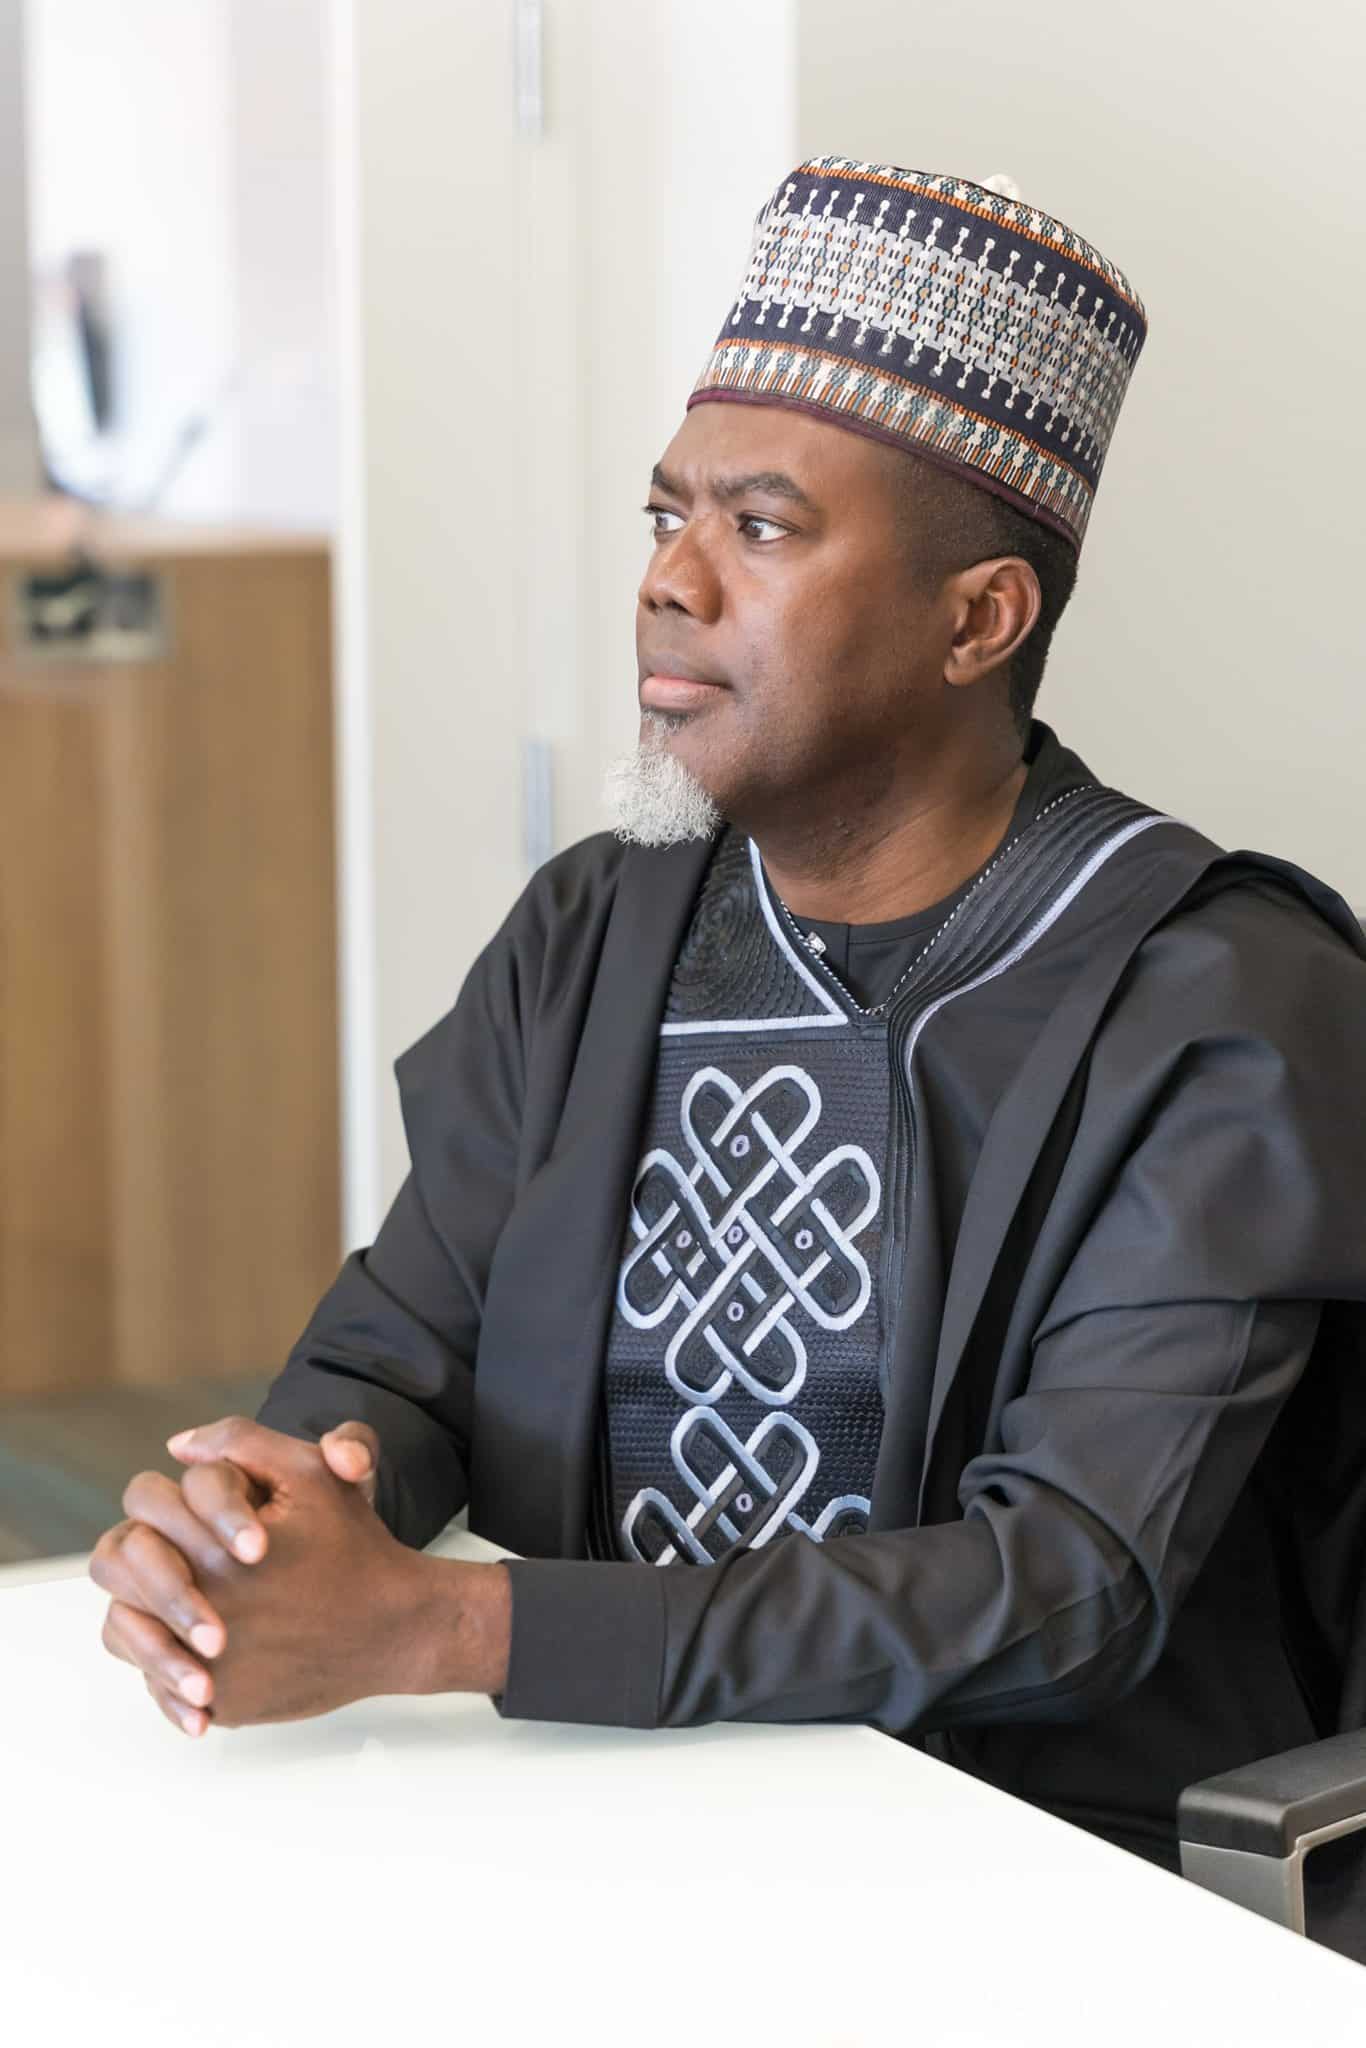 "I know what it means to be falsely accused” - Reno Omokri on why he interviewed Naira Marley